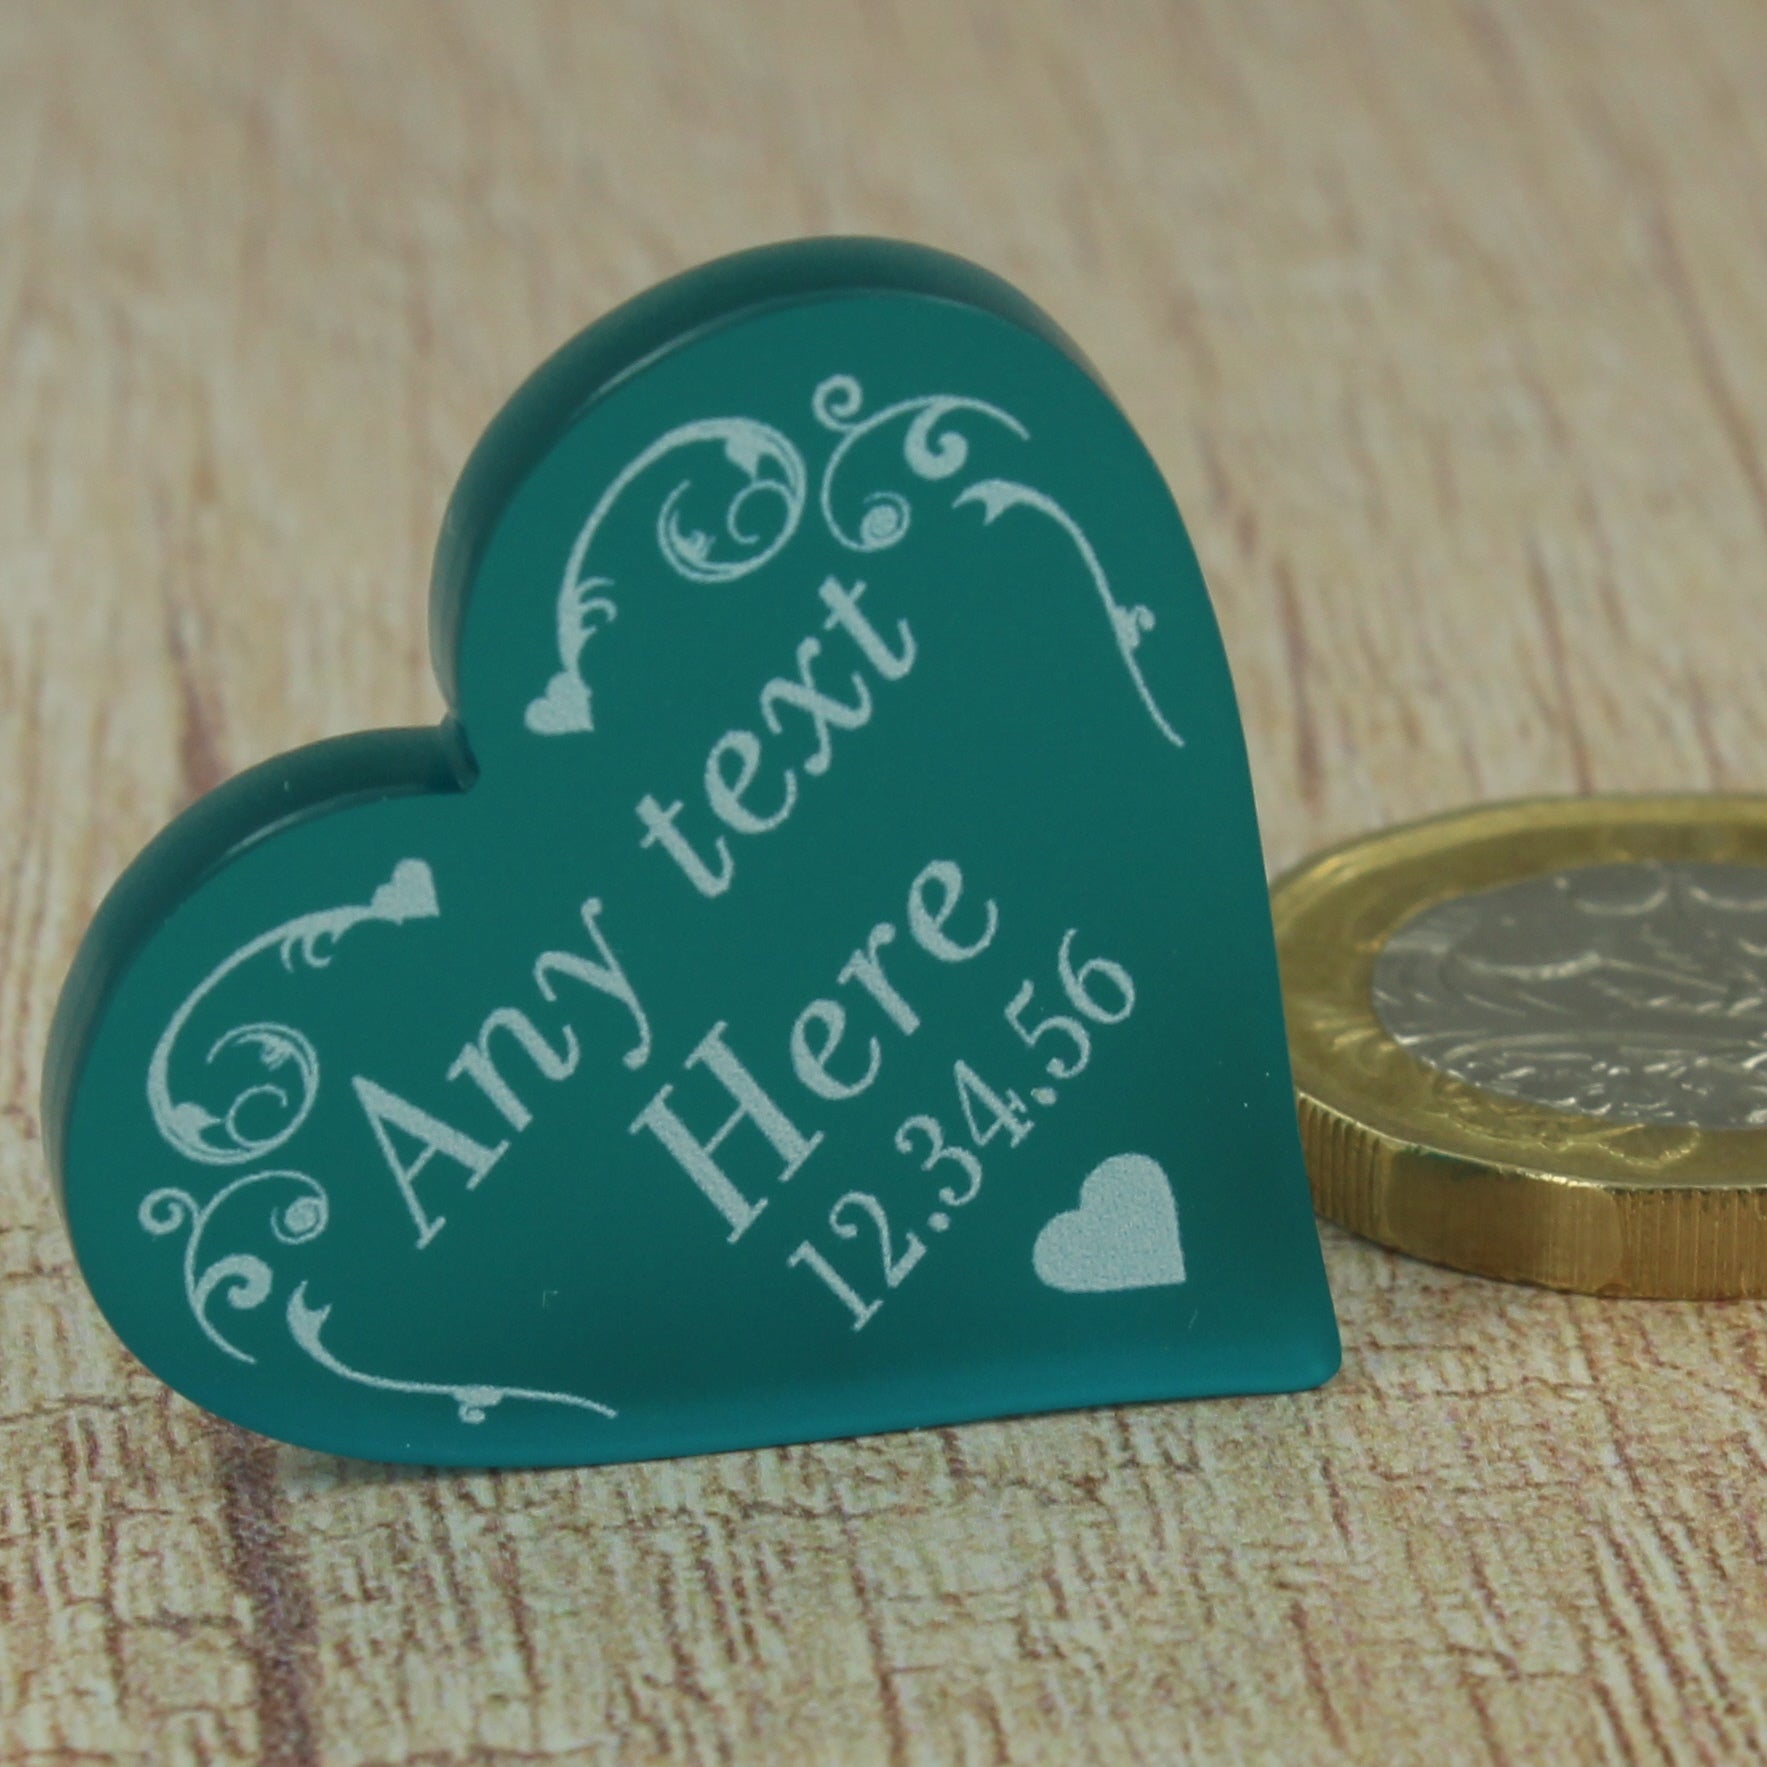 Personalised Wedding Favours - Frosted Teal Acrylic Swirl Love Hearts